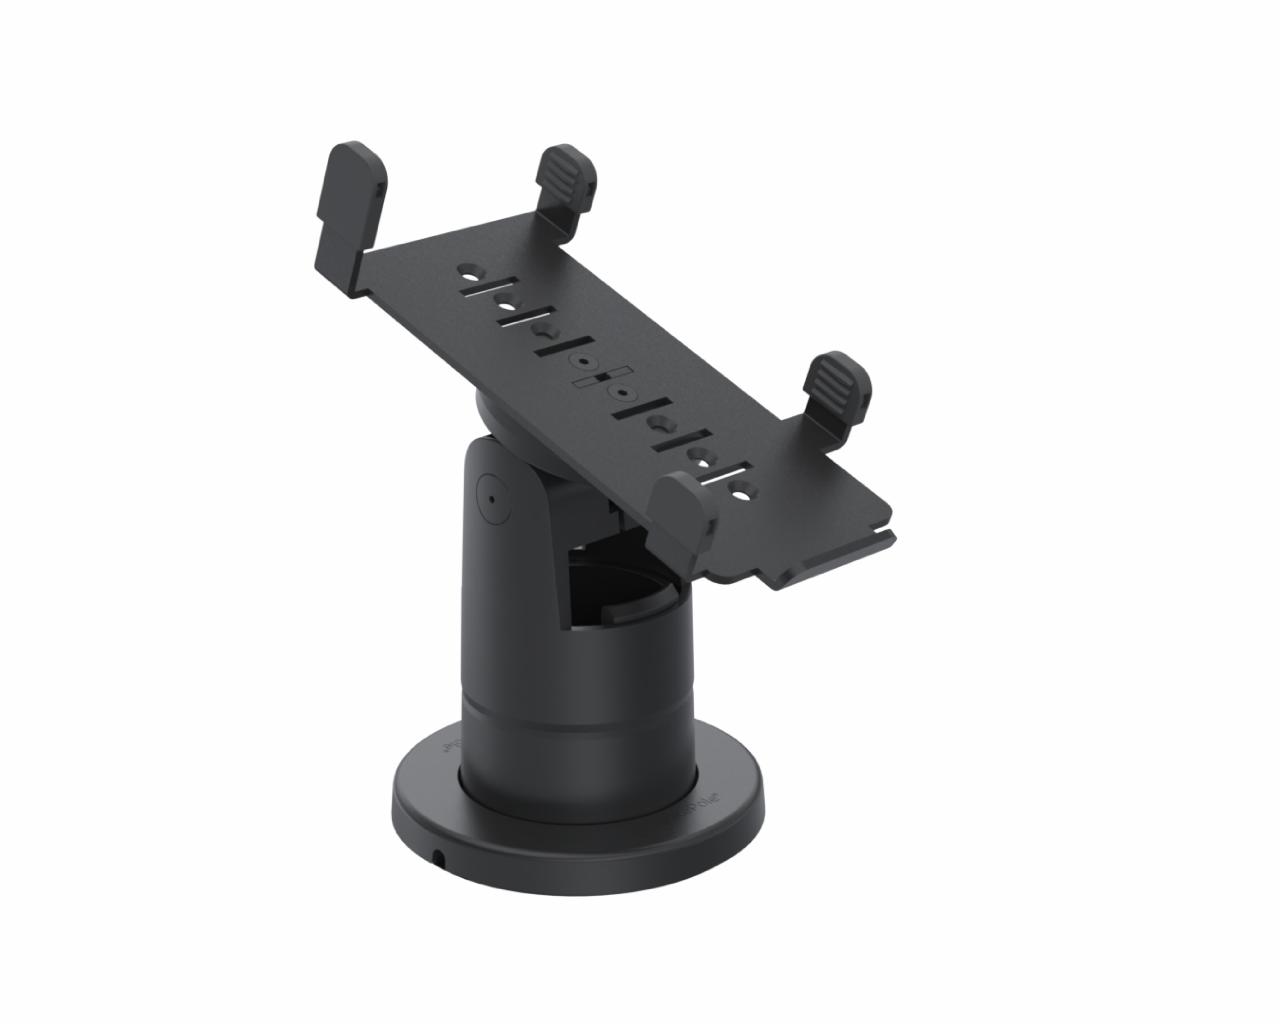 SpacePole Stack with MultiGrip plate for VeriFone VX690 (no handle)